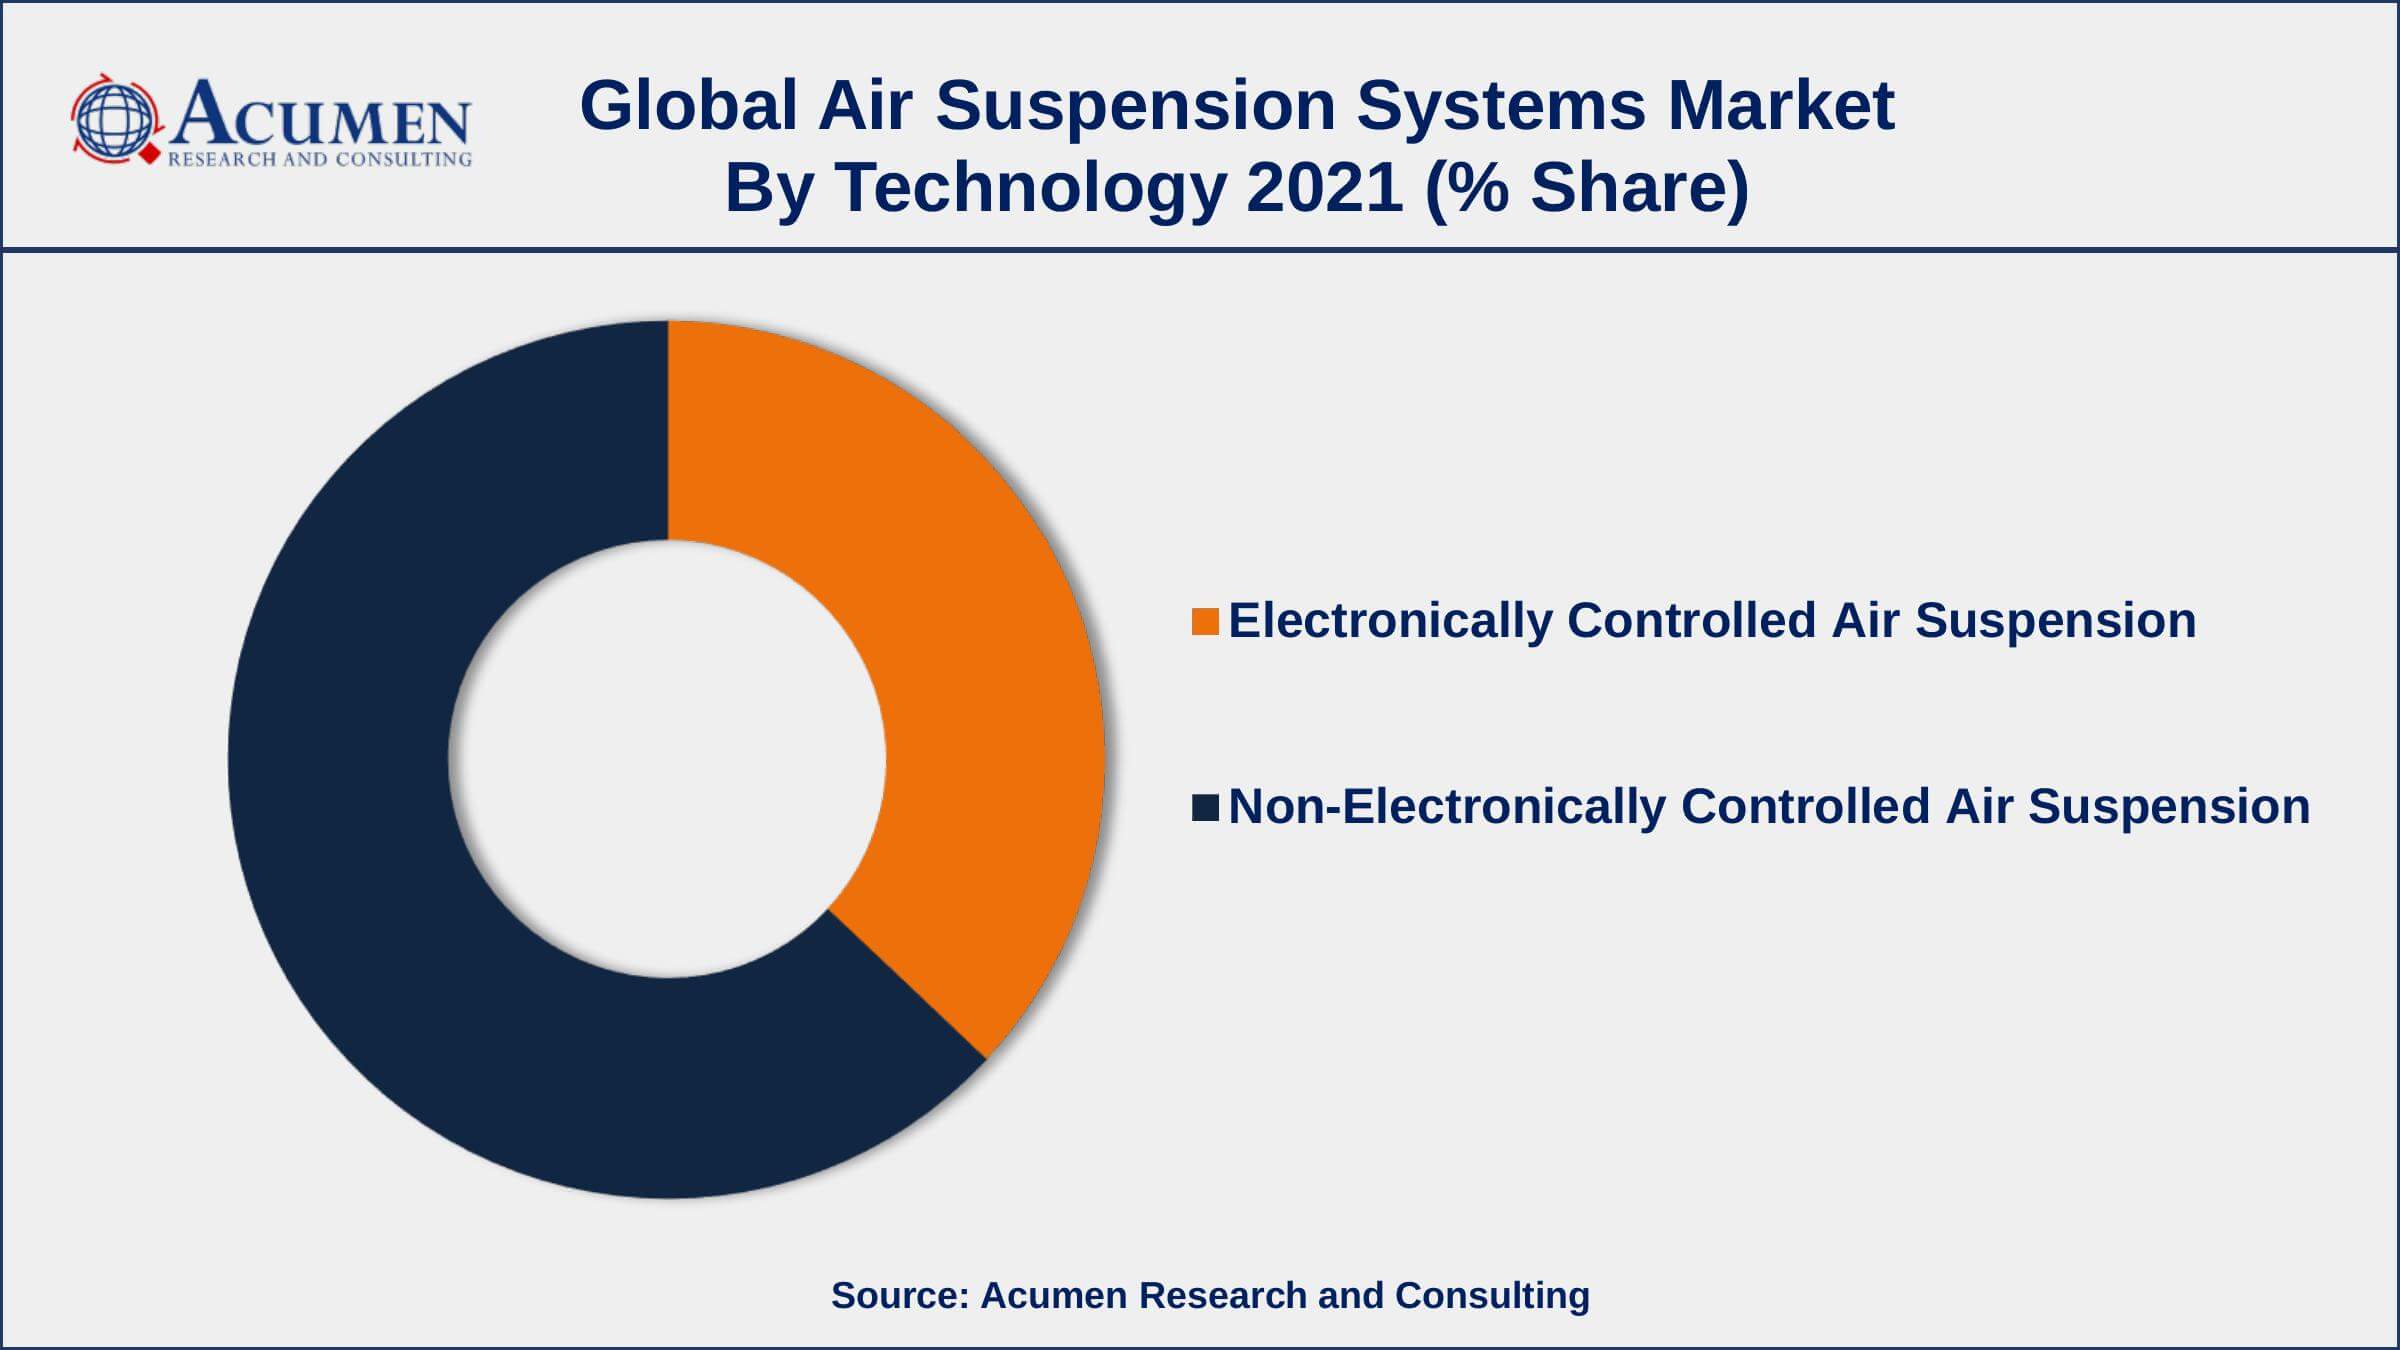 By technology, non-electronically controlled segment engaged more than 62% of the total market share in 2021